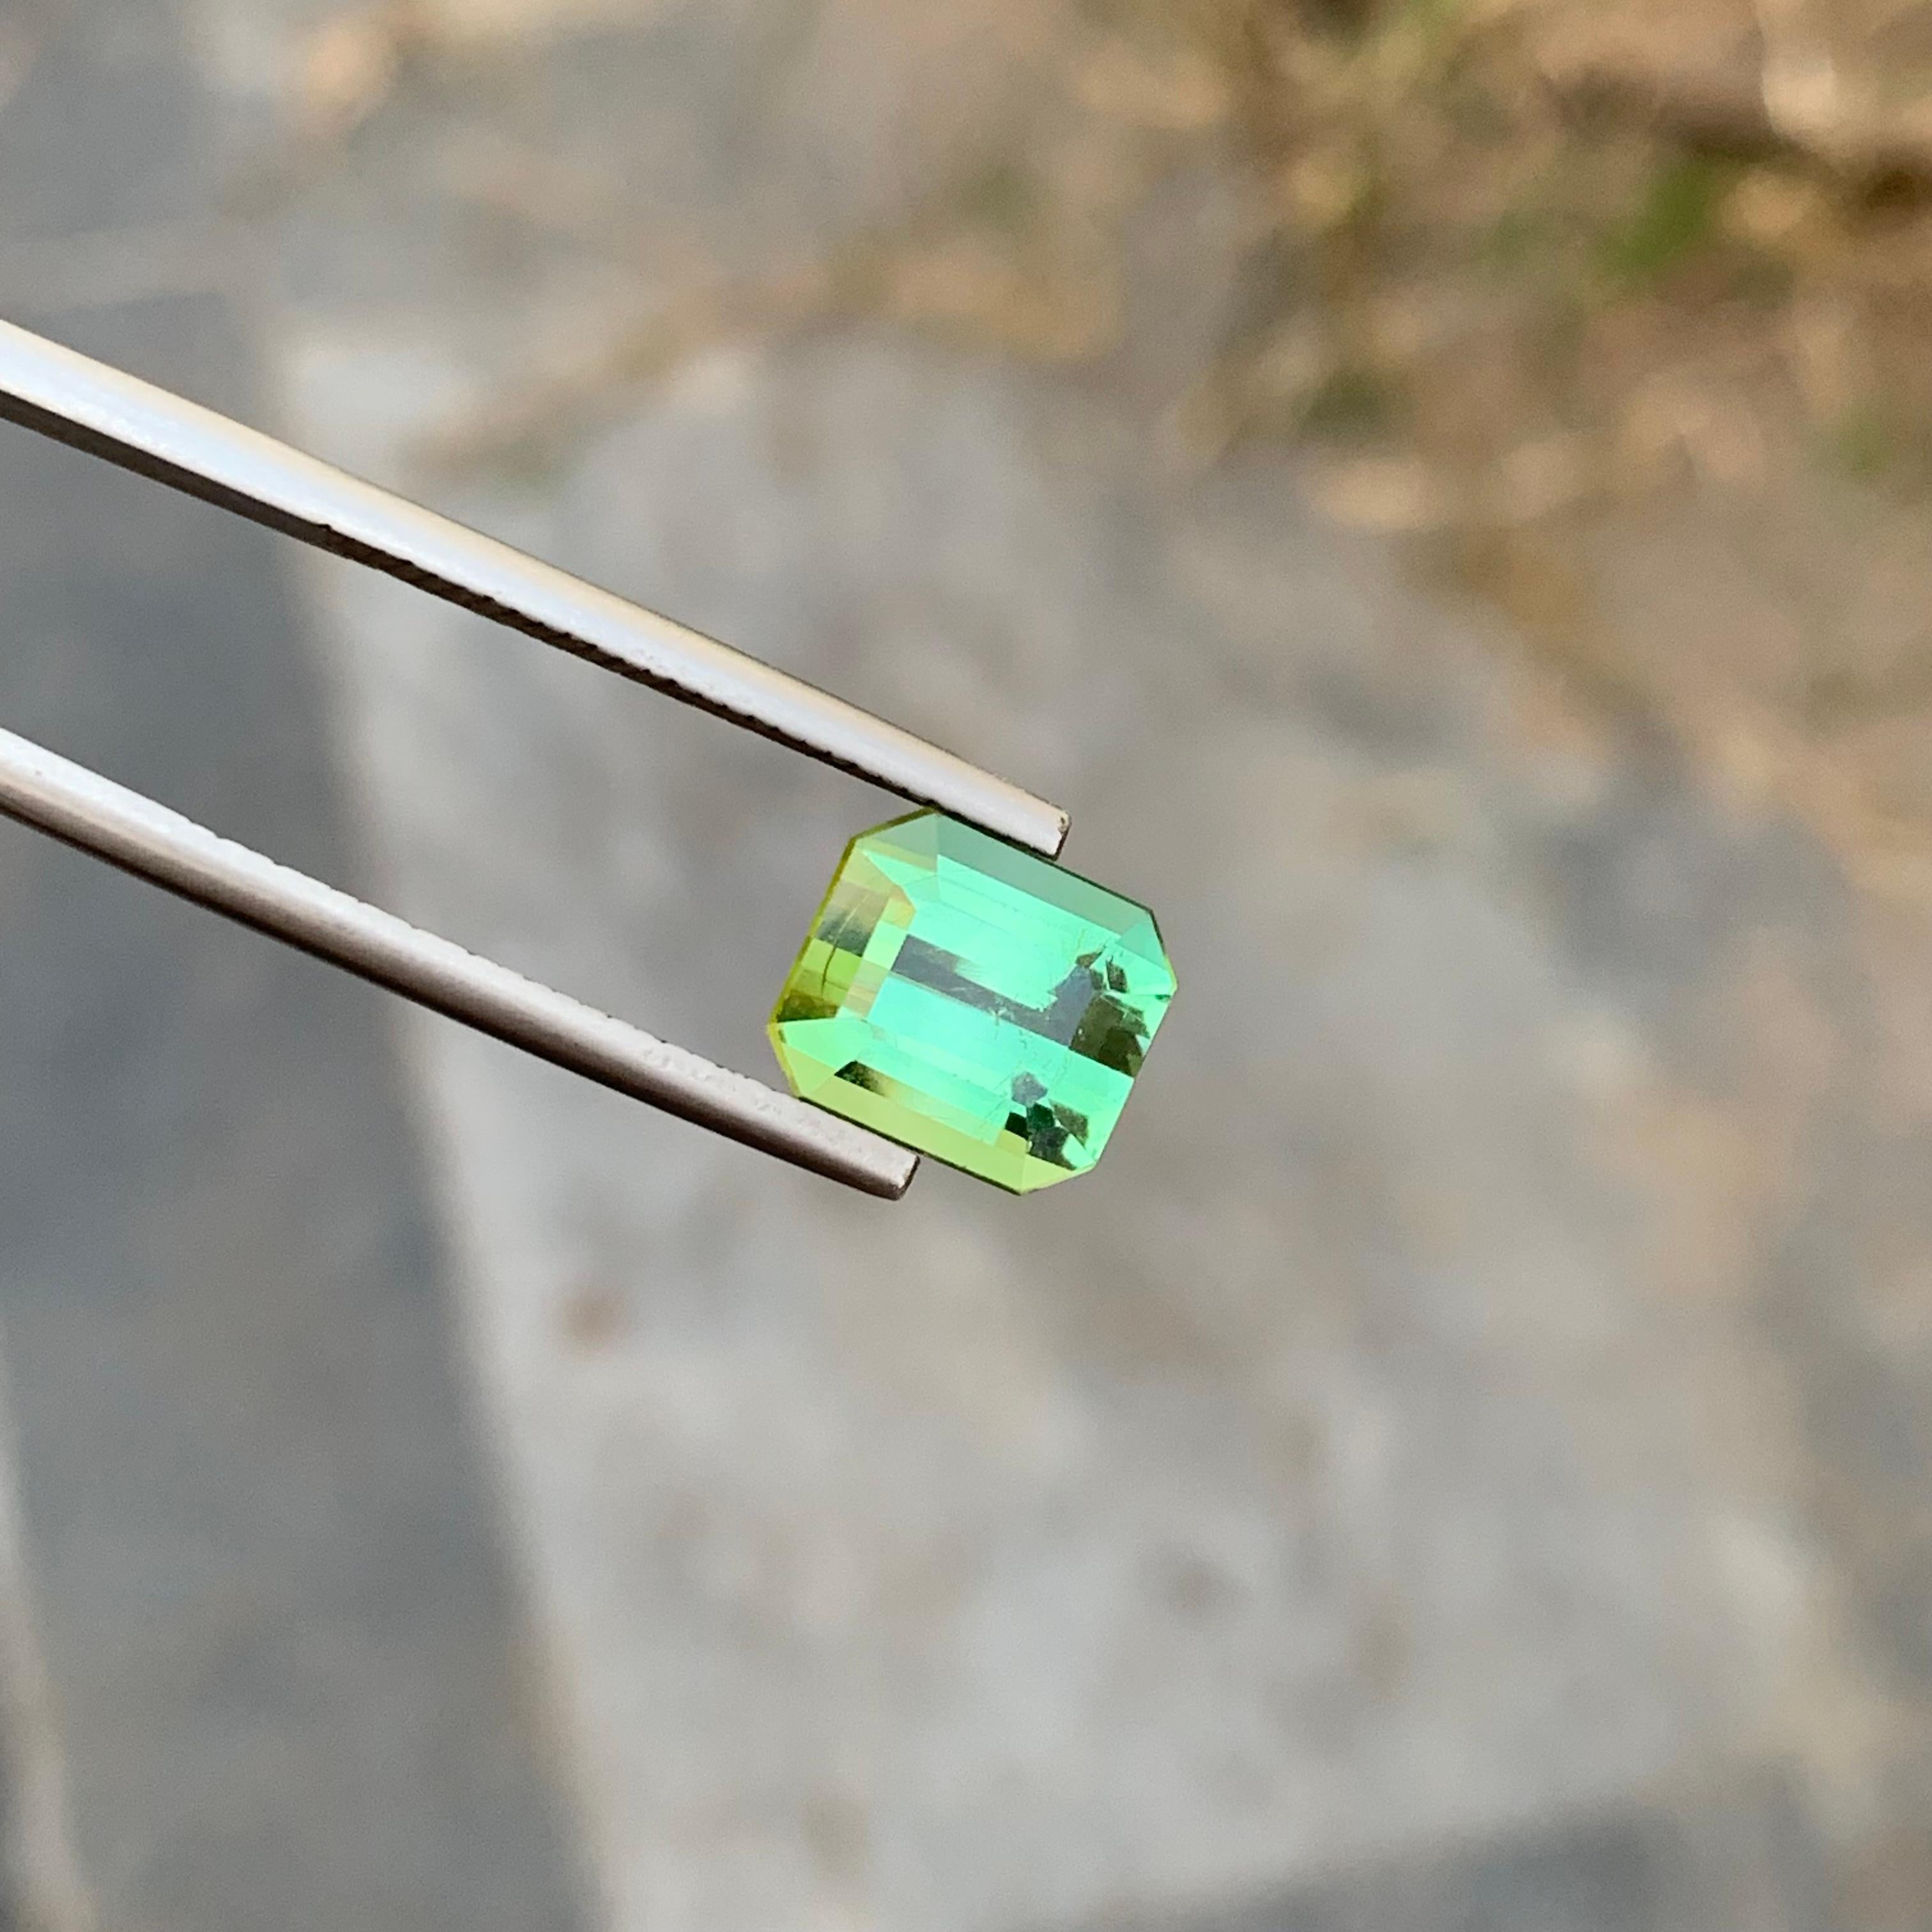 3.70 Carat Natural Loose Mint Green Tourmaline Emerald Gem For Jewellery Making  For Sale 3